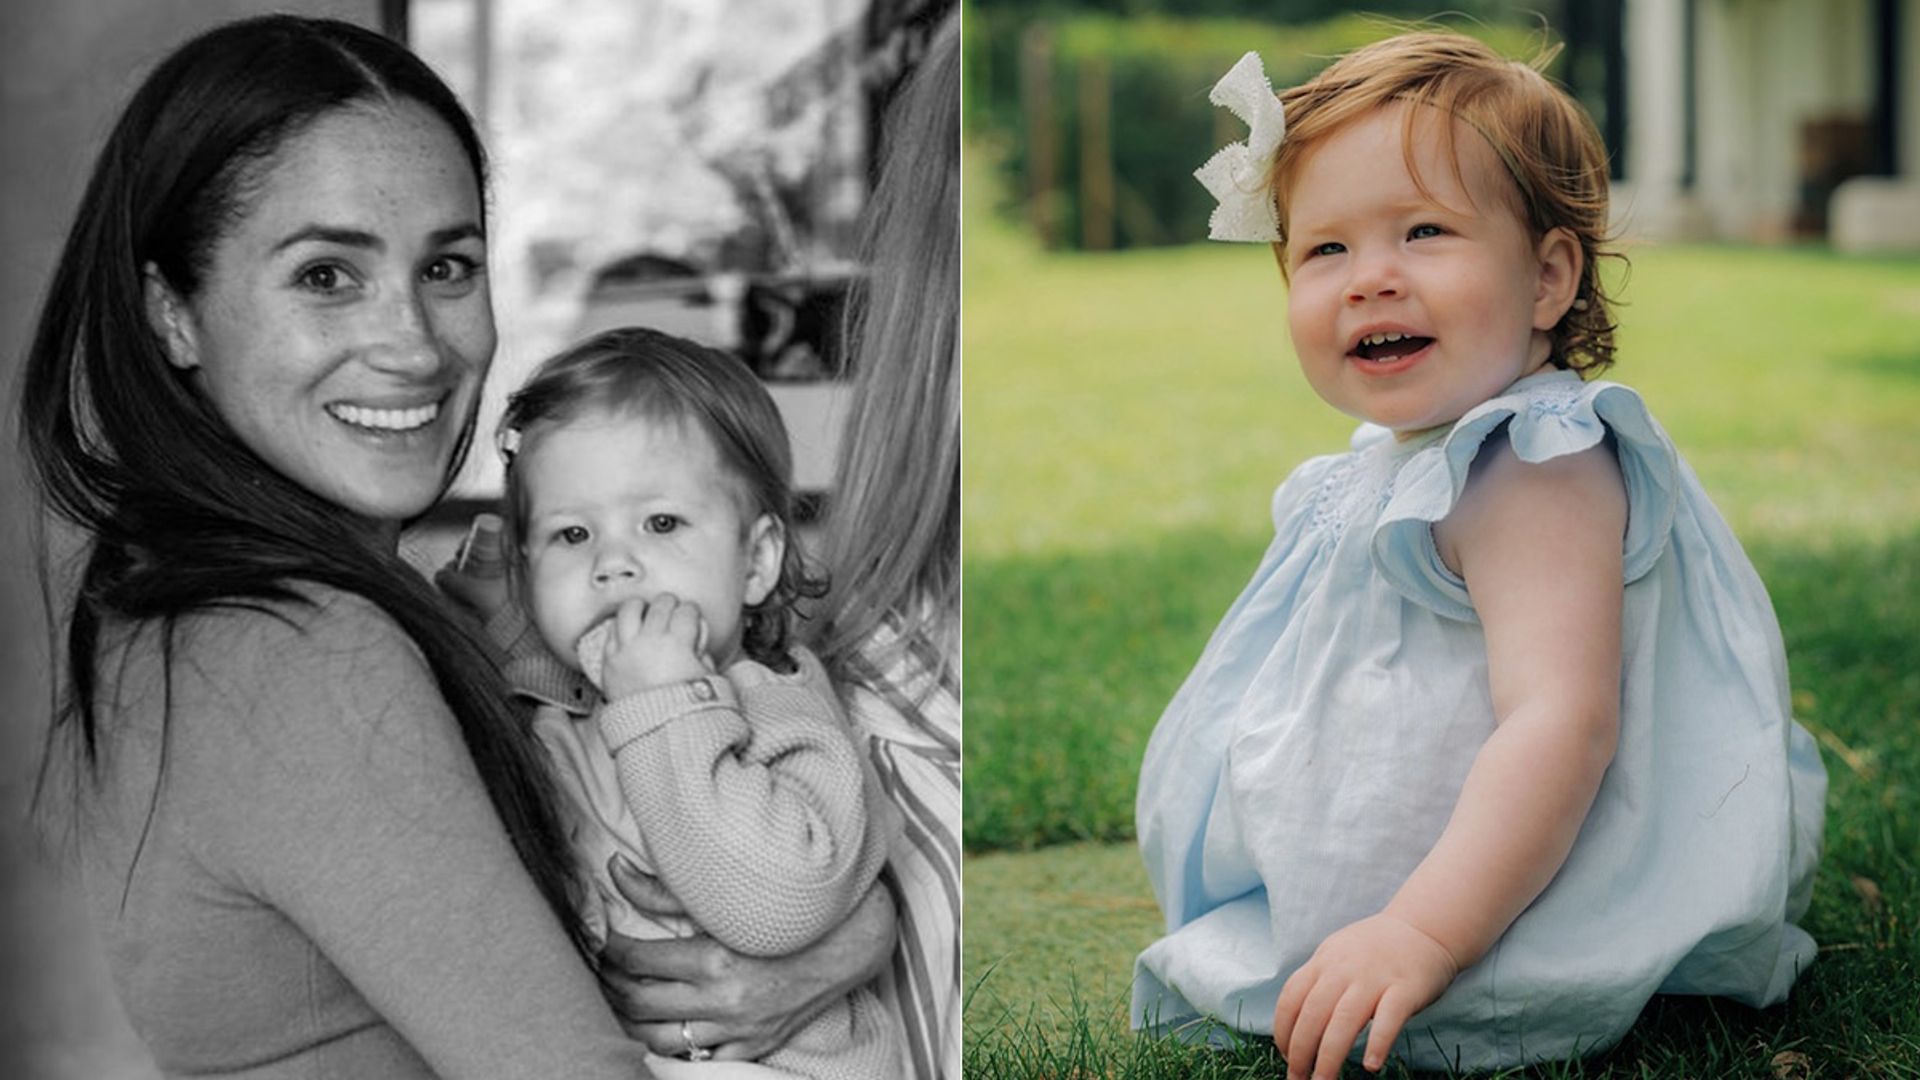 meghan markle and baby daughter lili